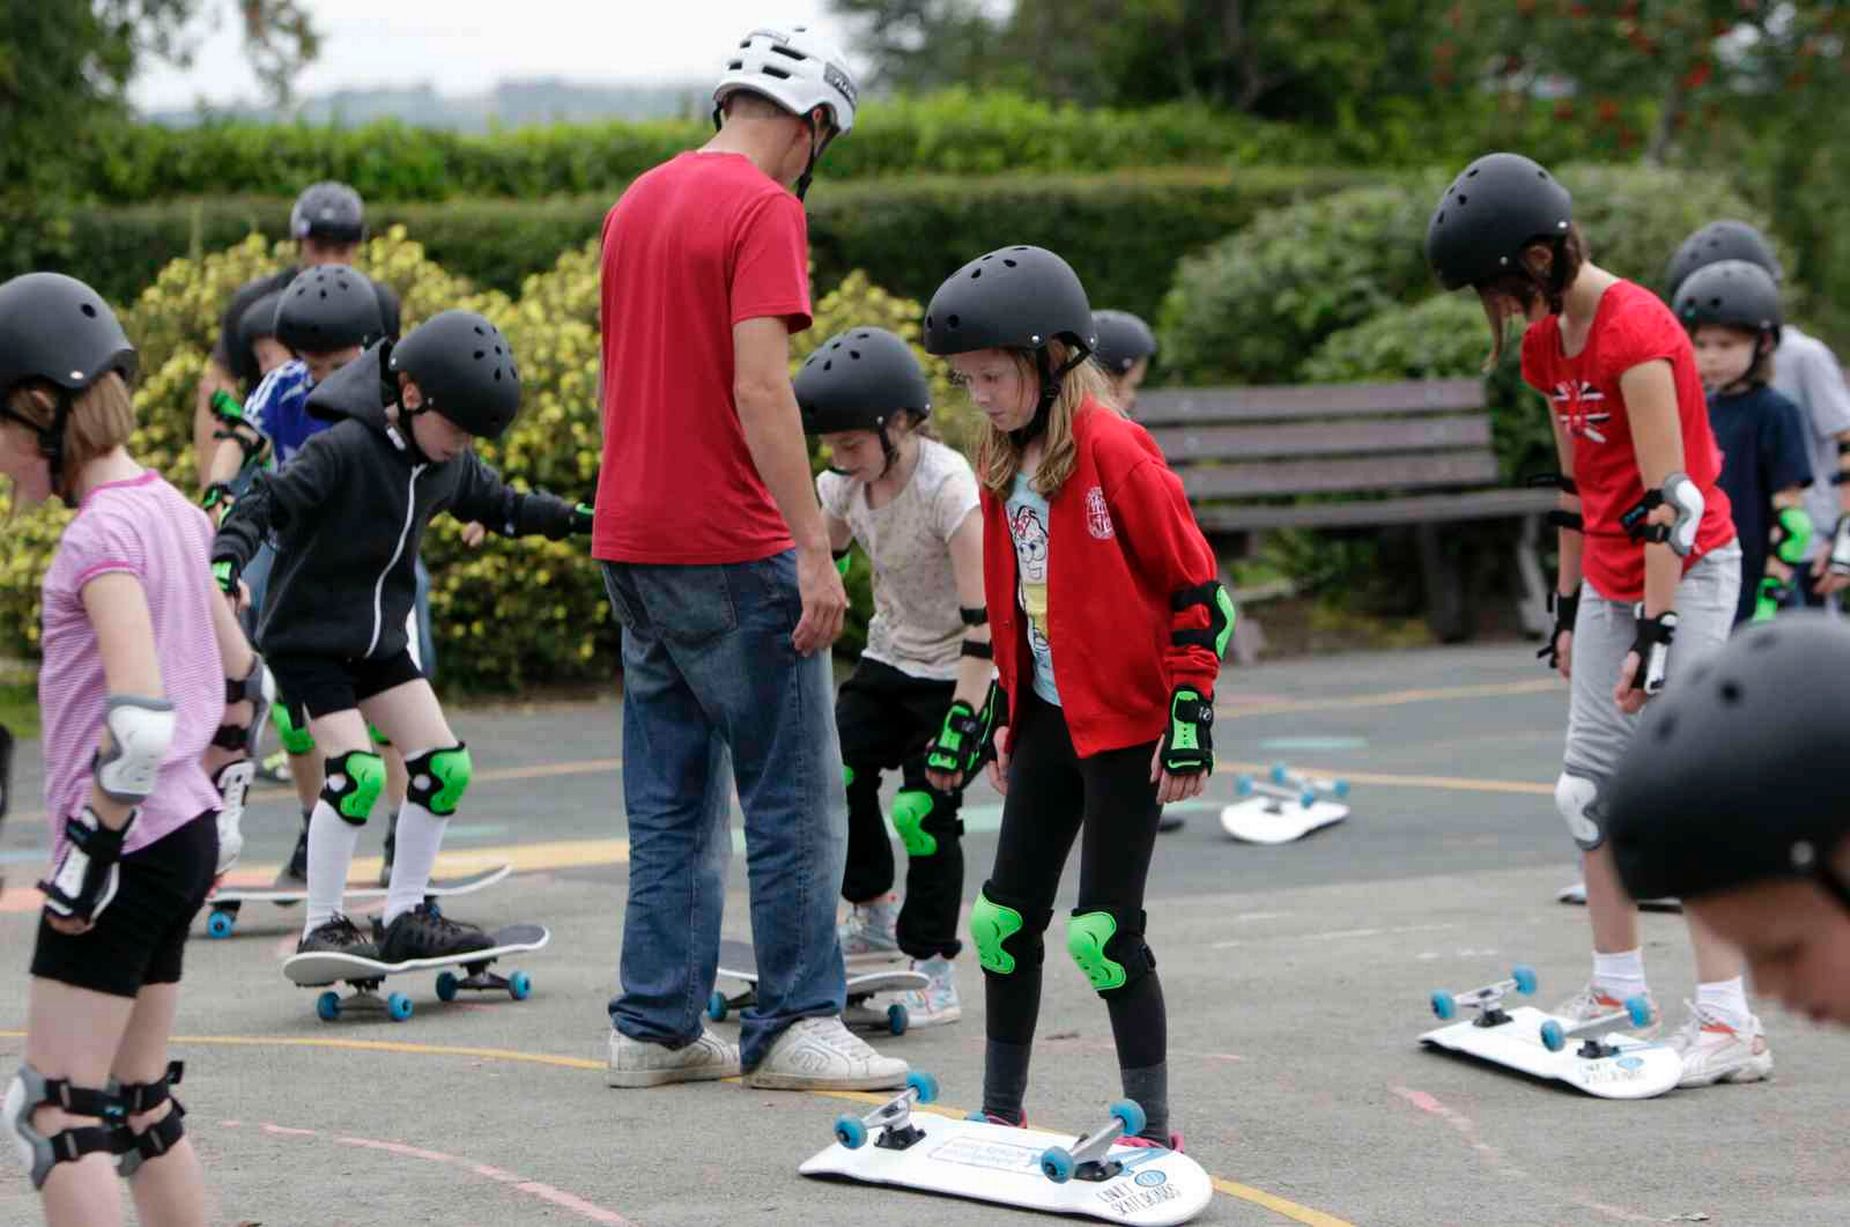 Skateboard Lessons - RollBack Skating Learn to Skateboard sessions